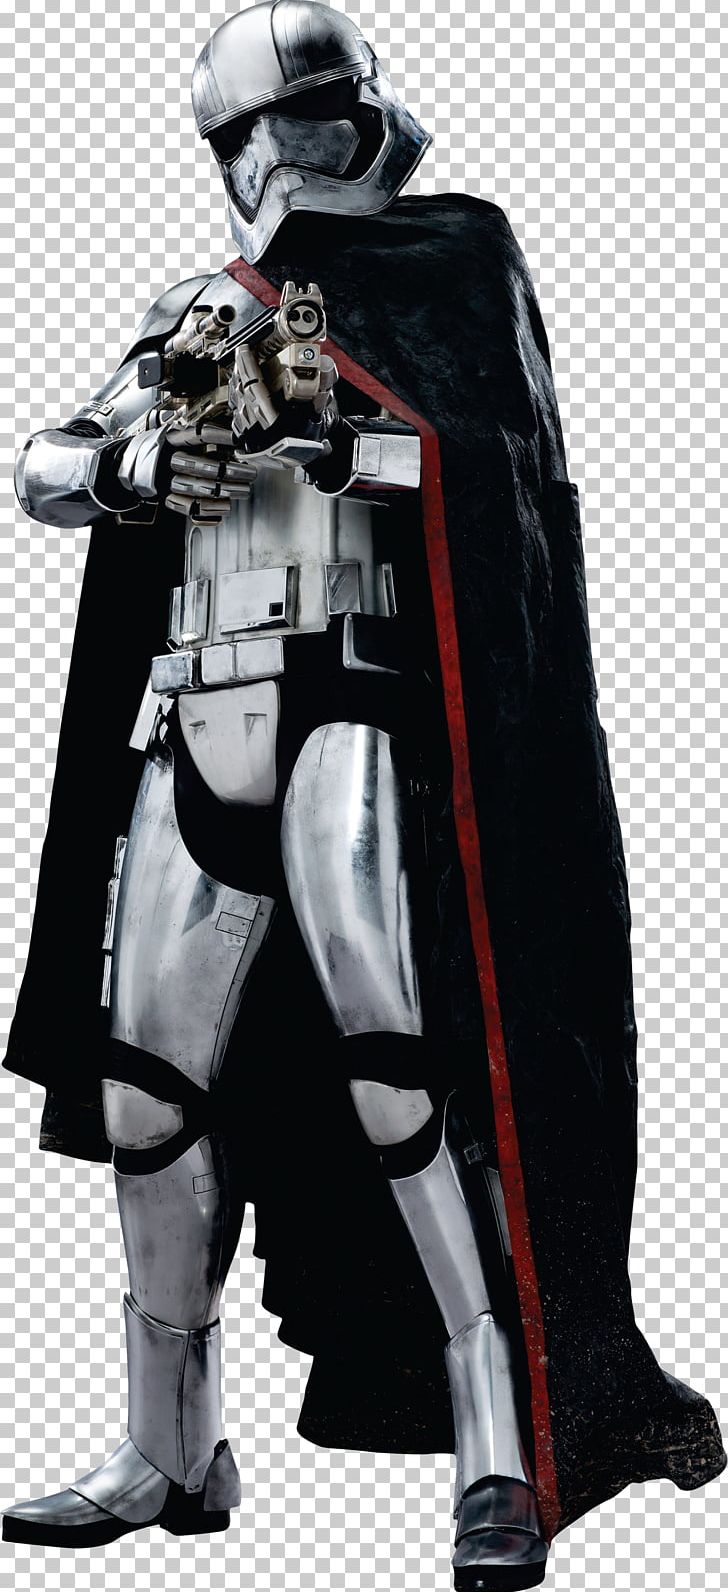 Captain Phasma Stormtrooper Kylo Ren Anakin Skywalker Yoda PNG, Clipart, Anakin Skywalker, Armour, Captain Phasma, Character, Costume Free PNG Download